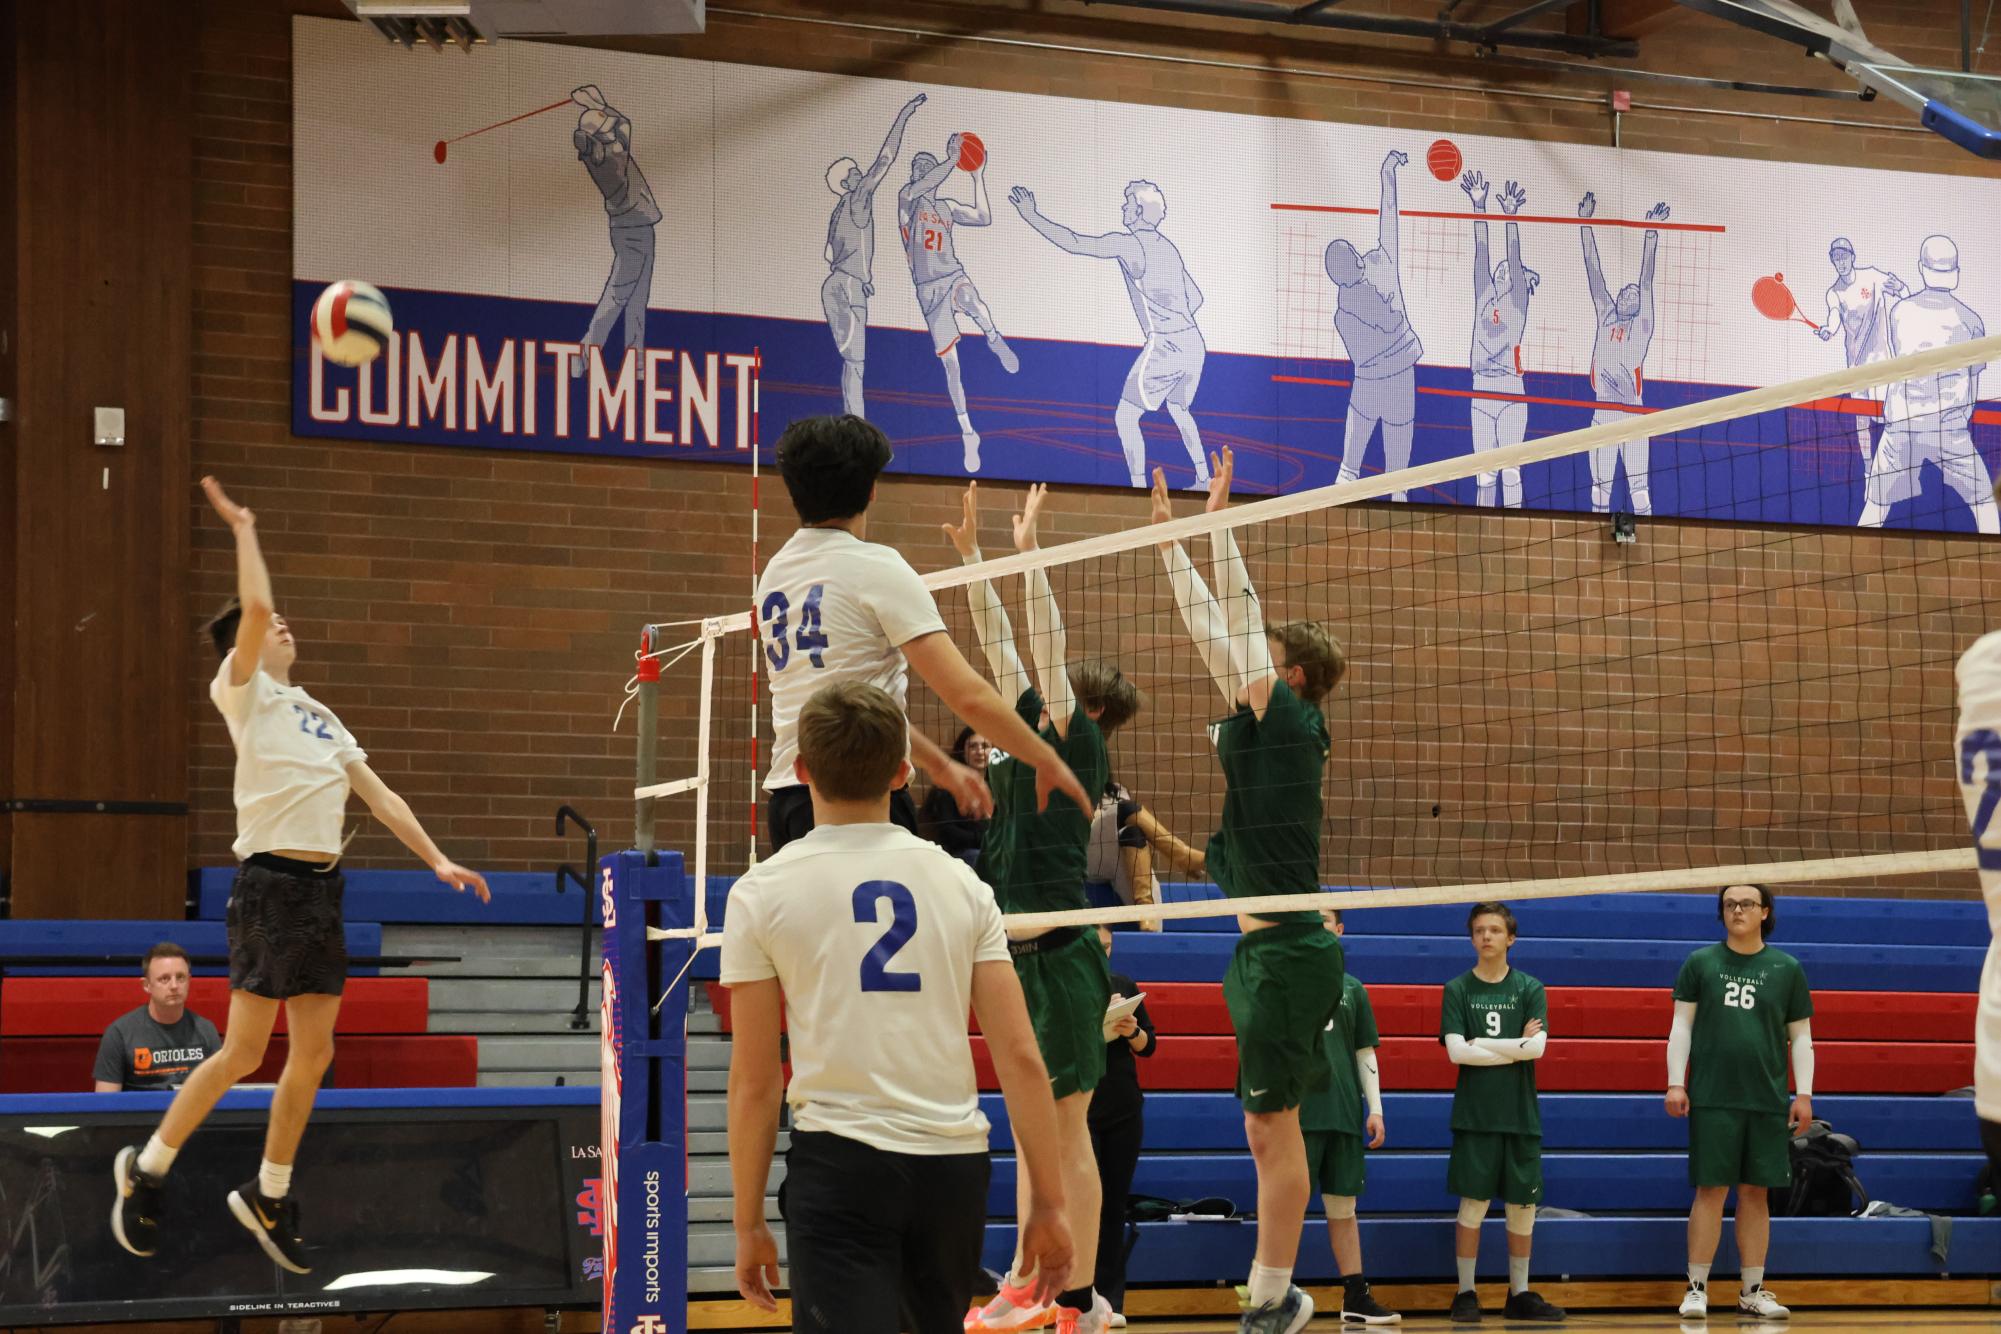 Boys+Volleyball+Team+Conquers+The+Net%2C+Earning+Their+First+Ever+Victory+In+A+Match+Against+Estacada+High+School